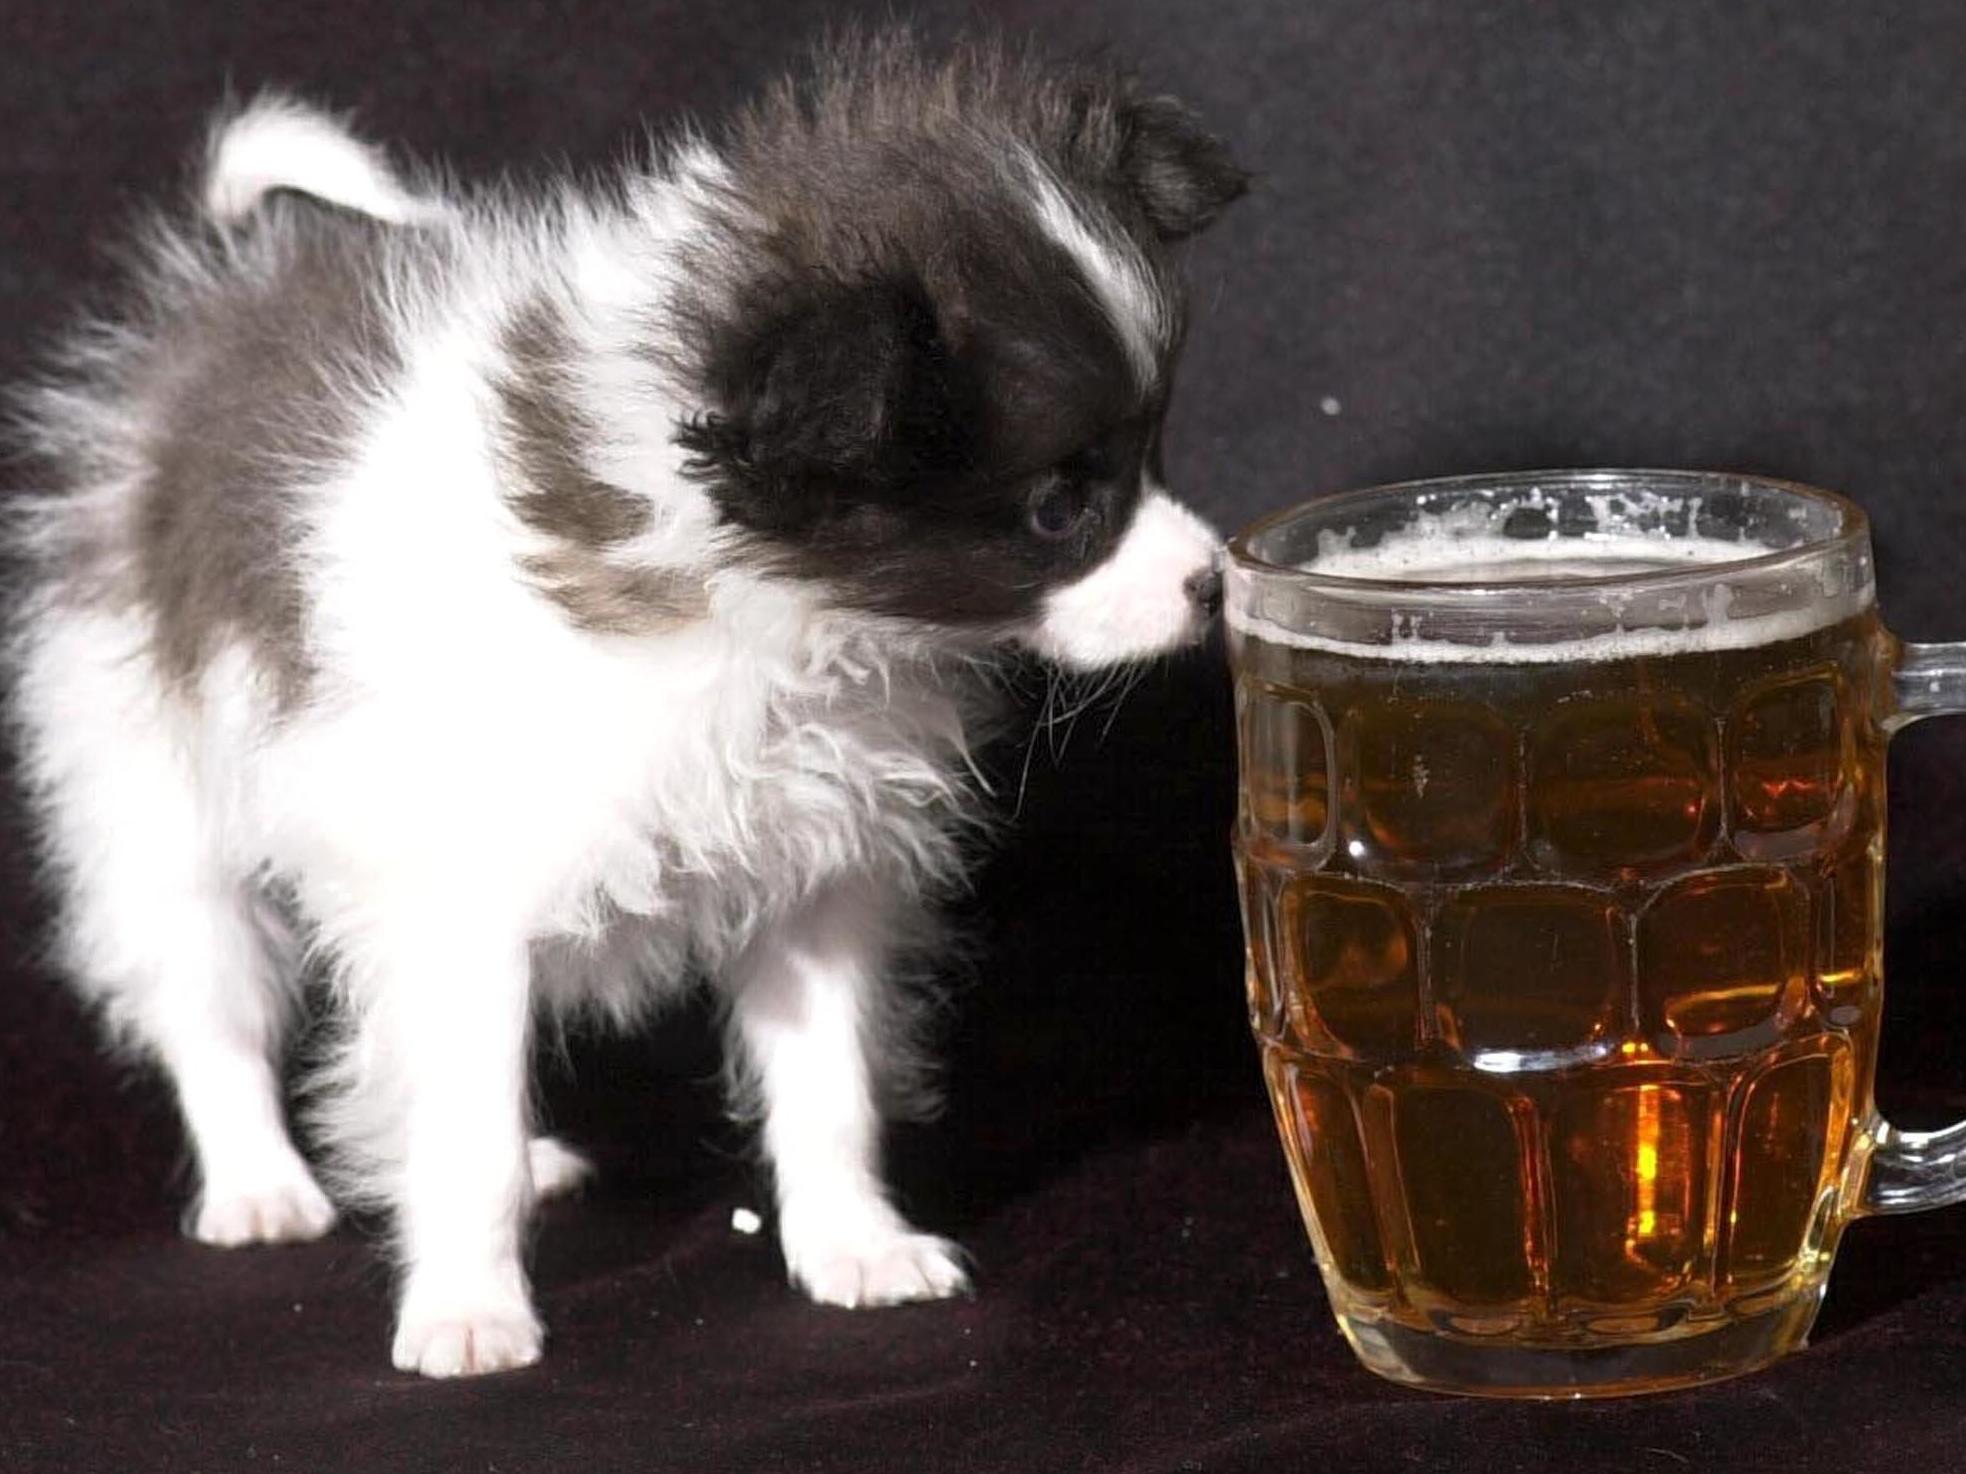 Dogs will no longer even be allowed in Wetherspoons' beer gardens